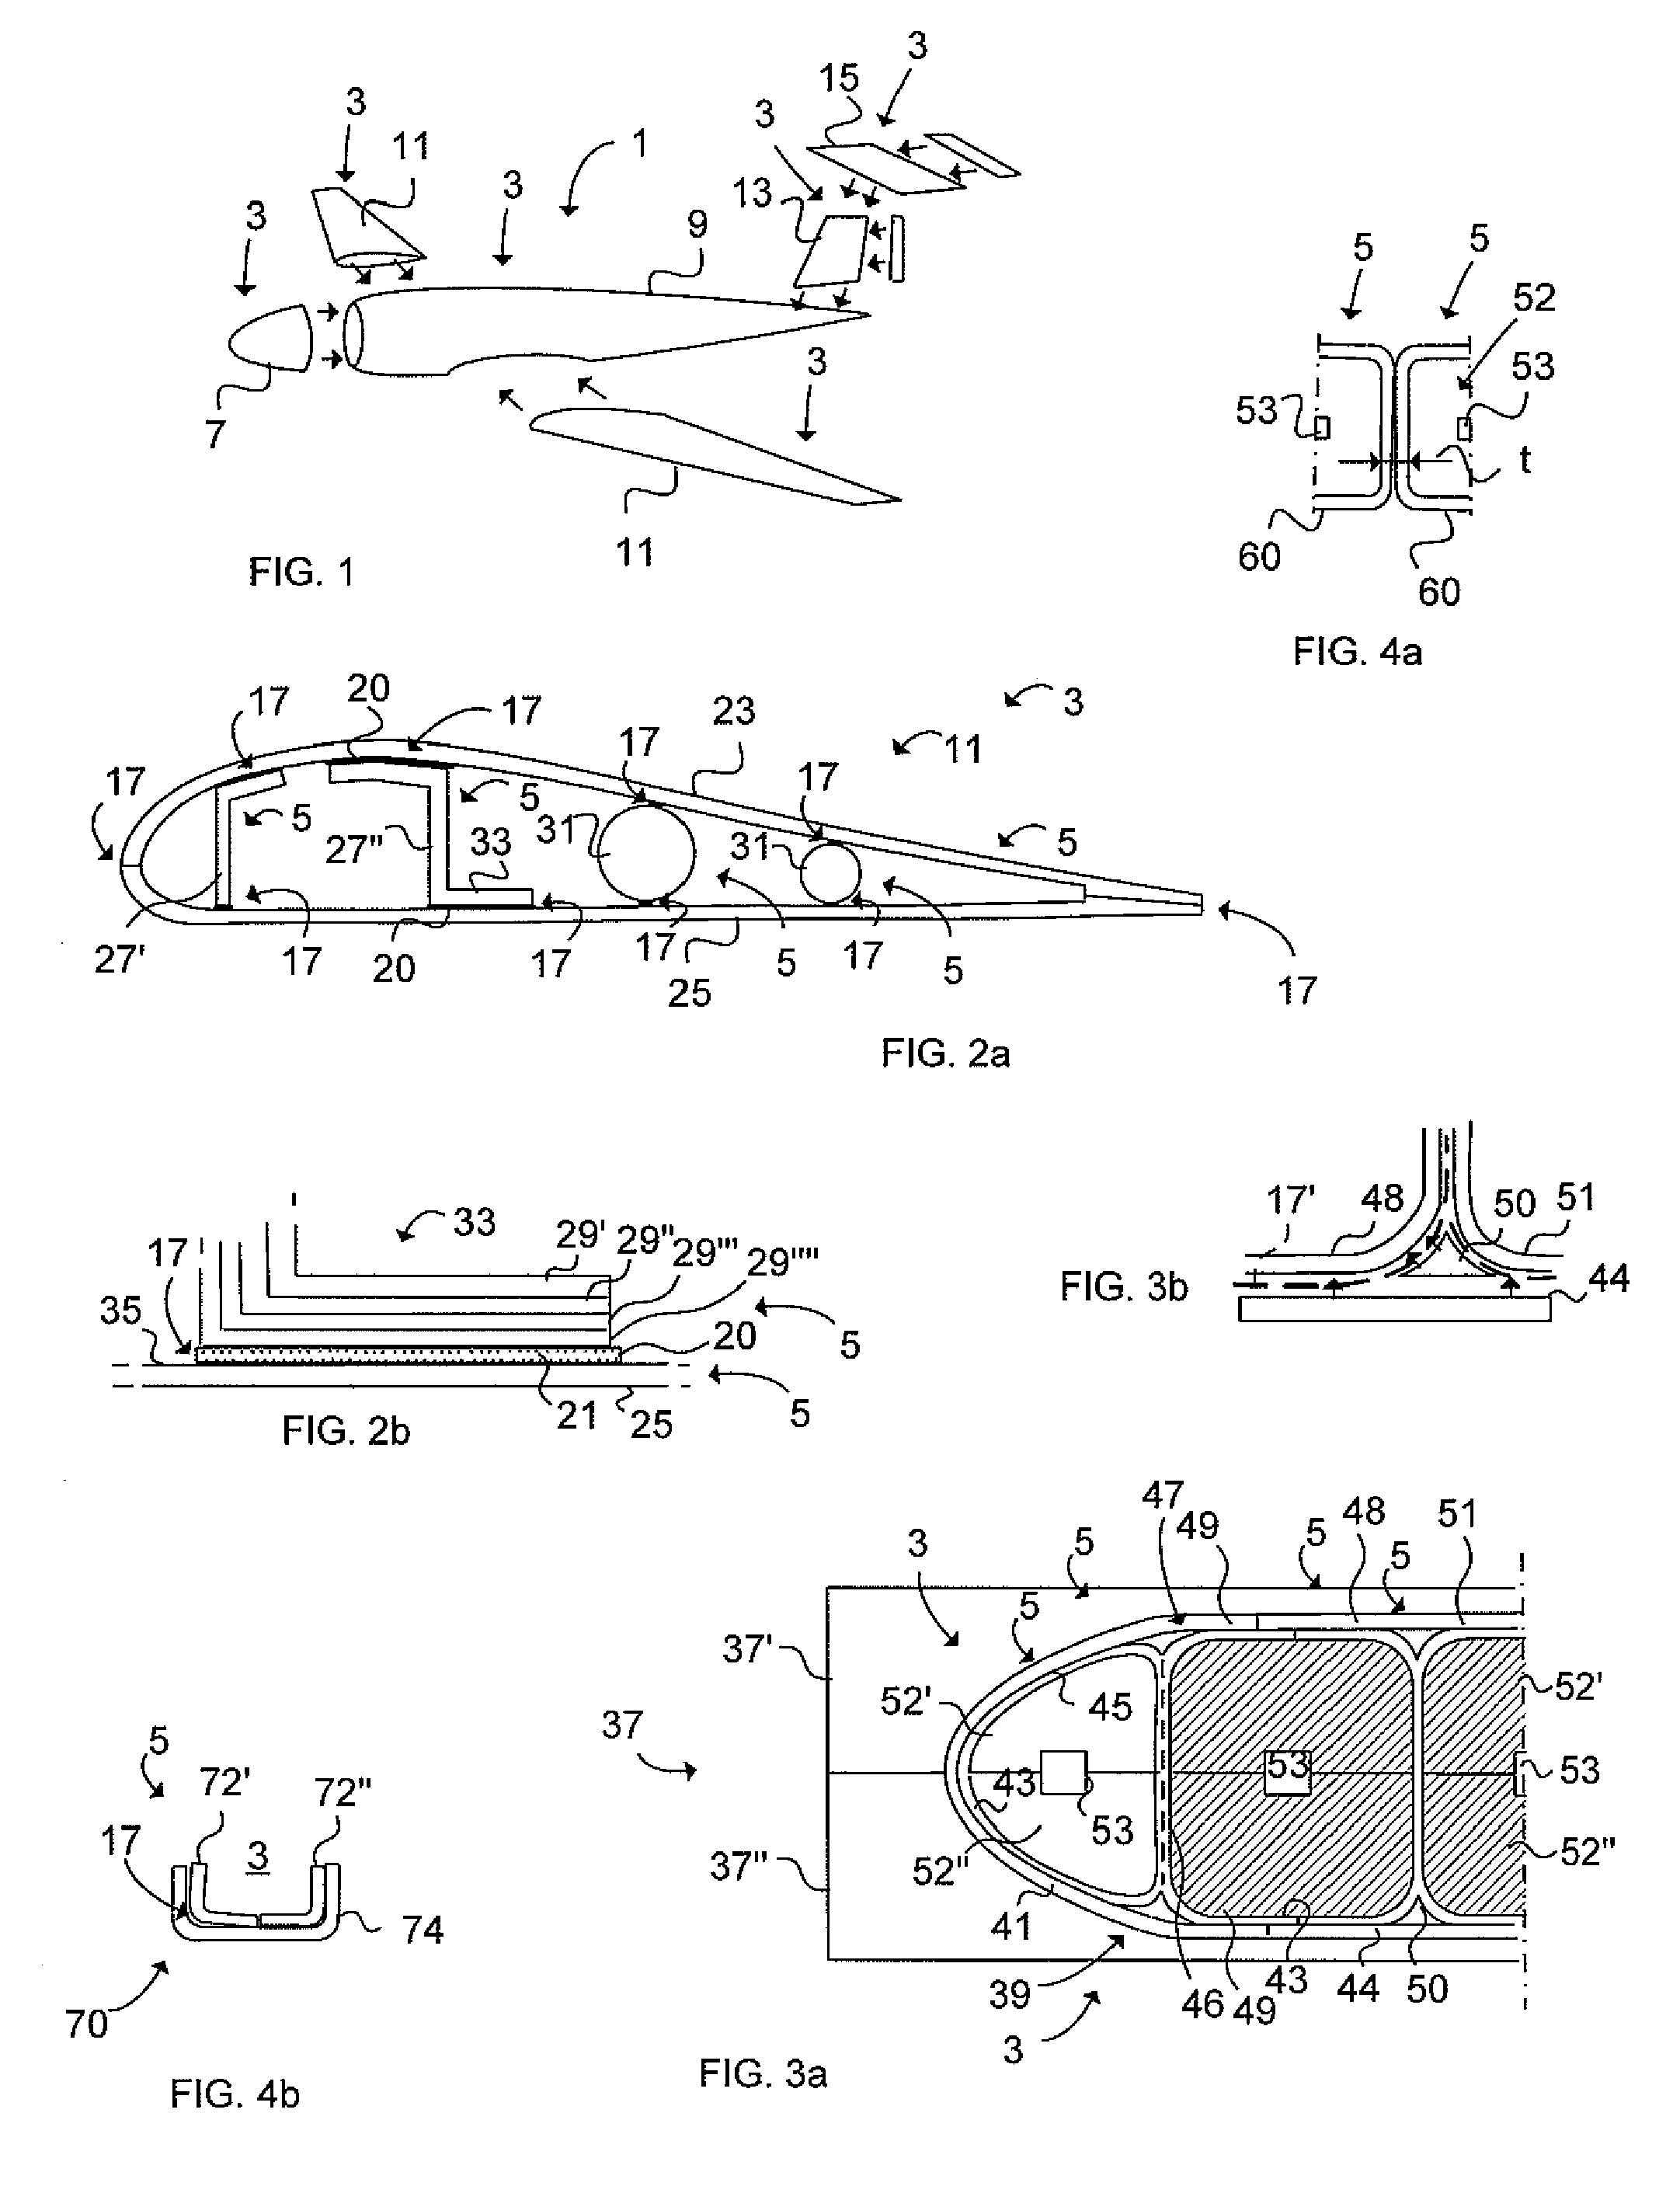 Aircraft structure with structural parts connected by nanostructure and a method for making said aircraft structure